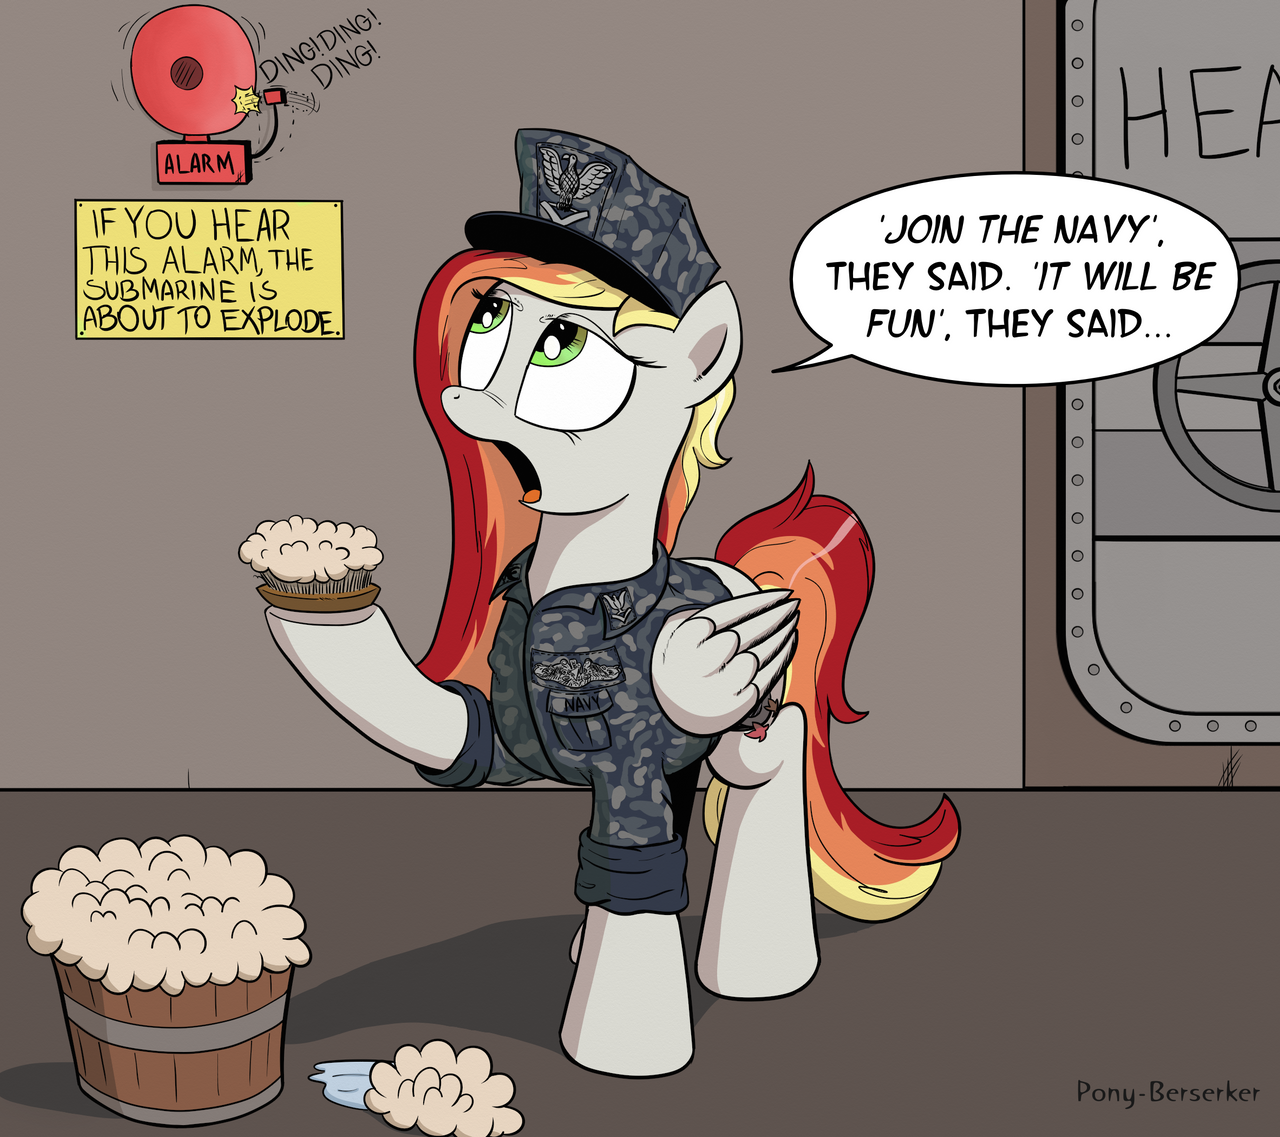 [Image: join_the_navy__by_pony_berserker-d6r25ul.png]